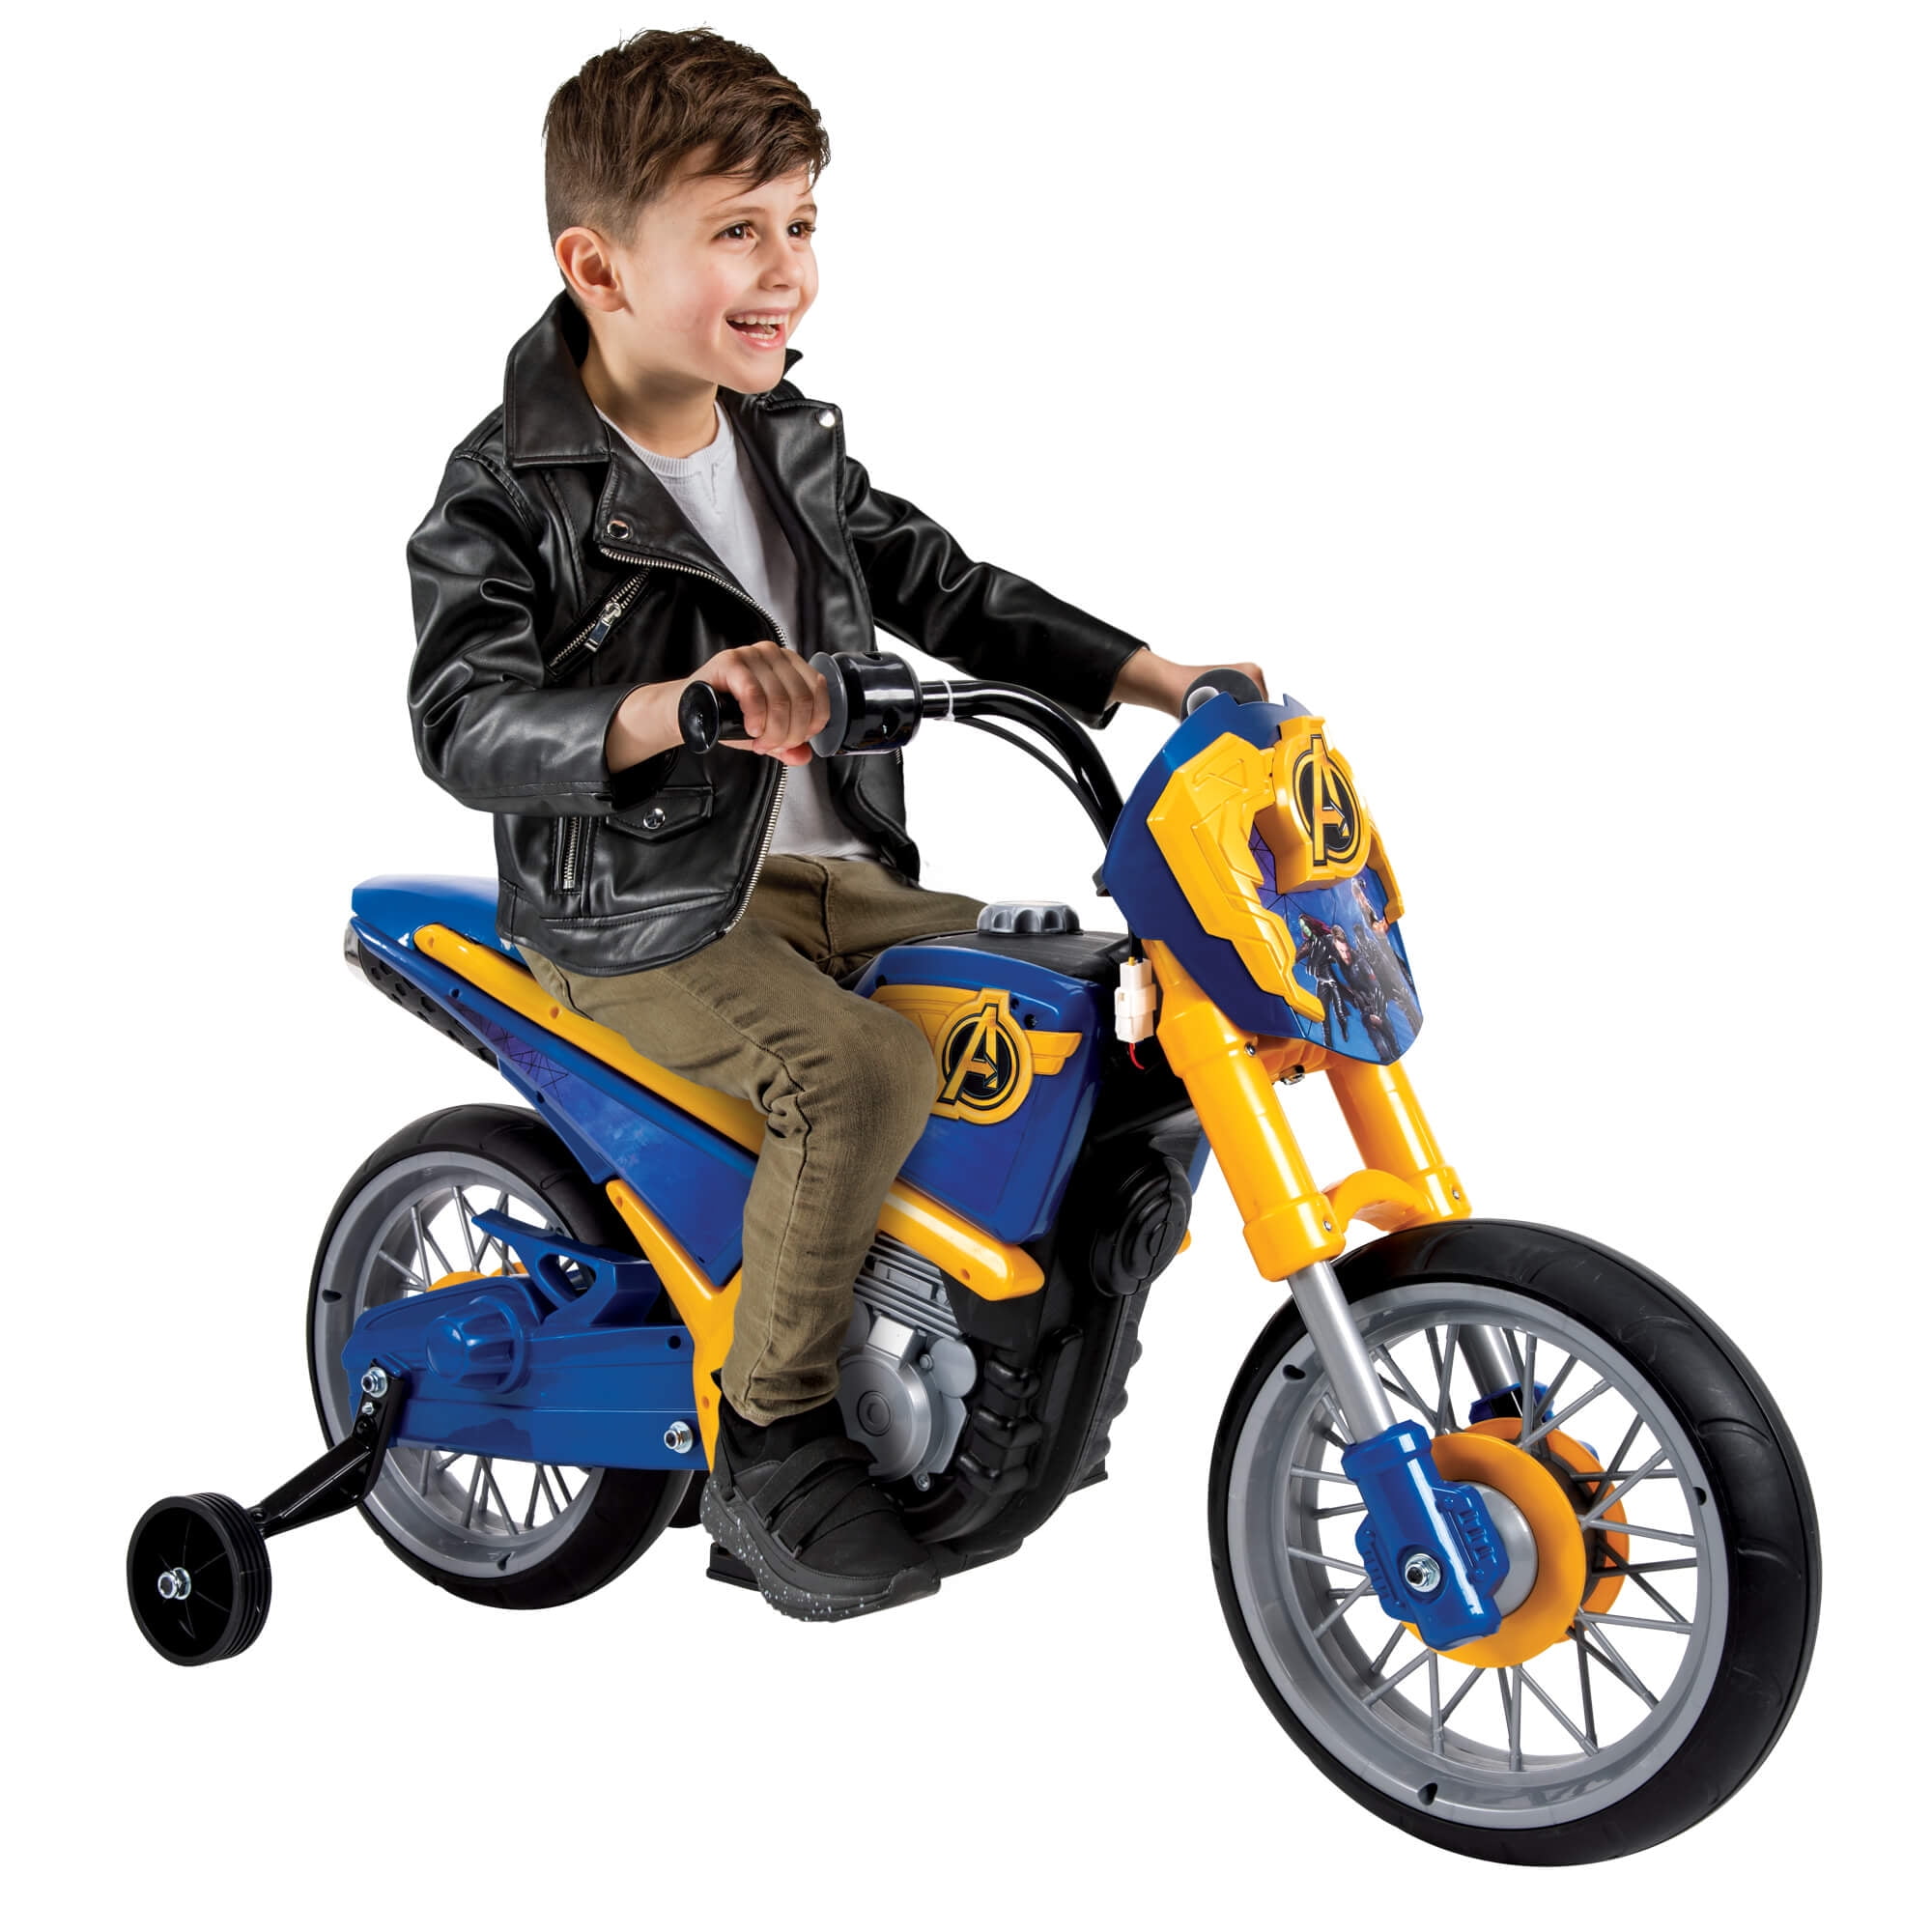 motorcycle ride on toy